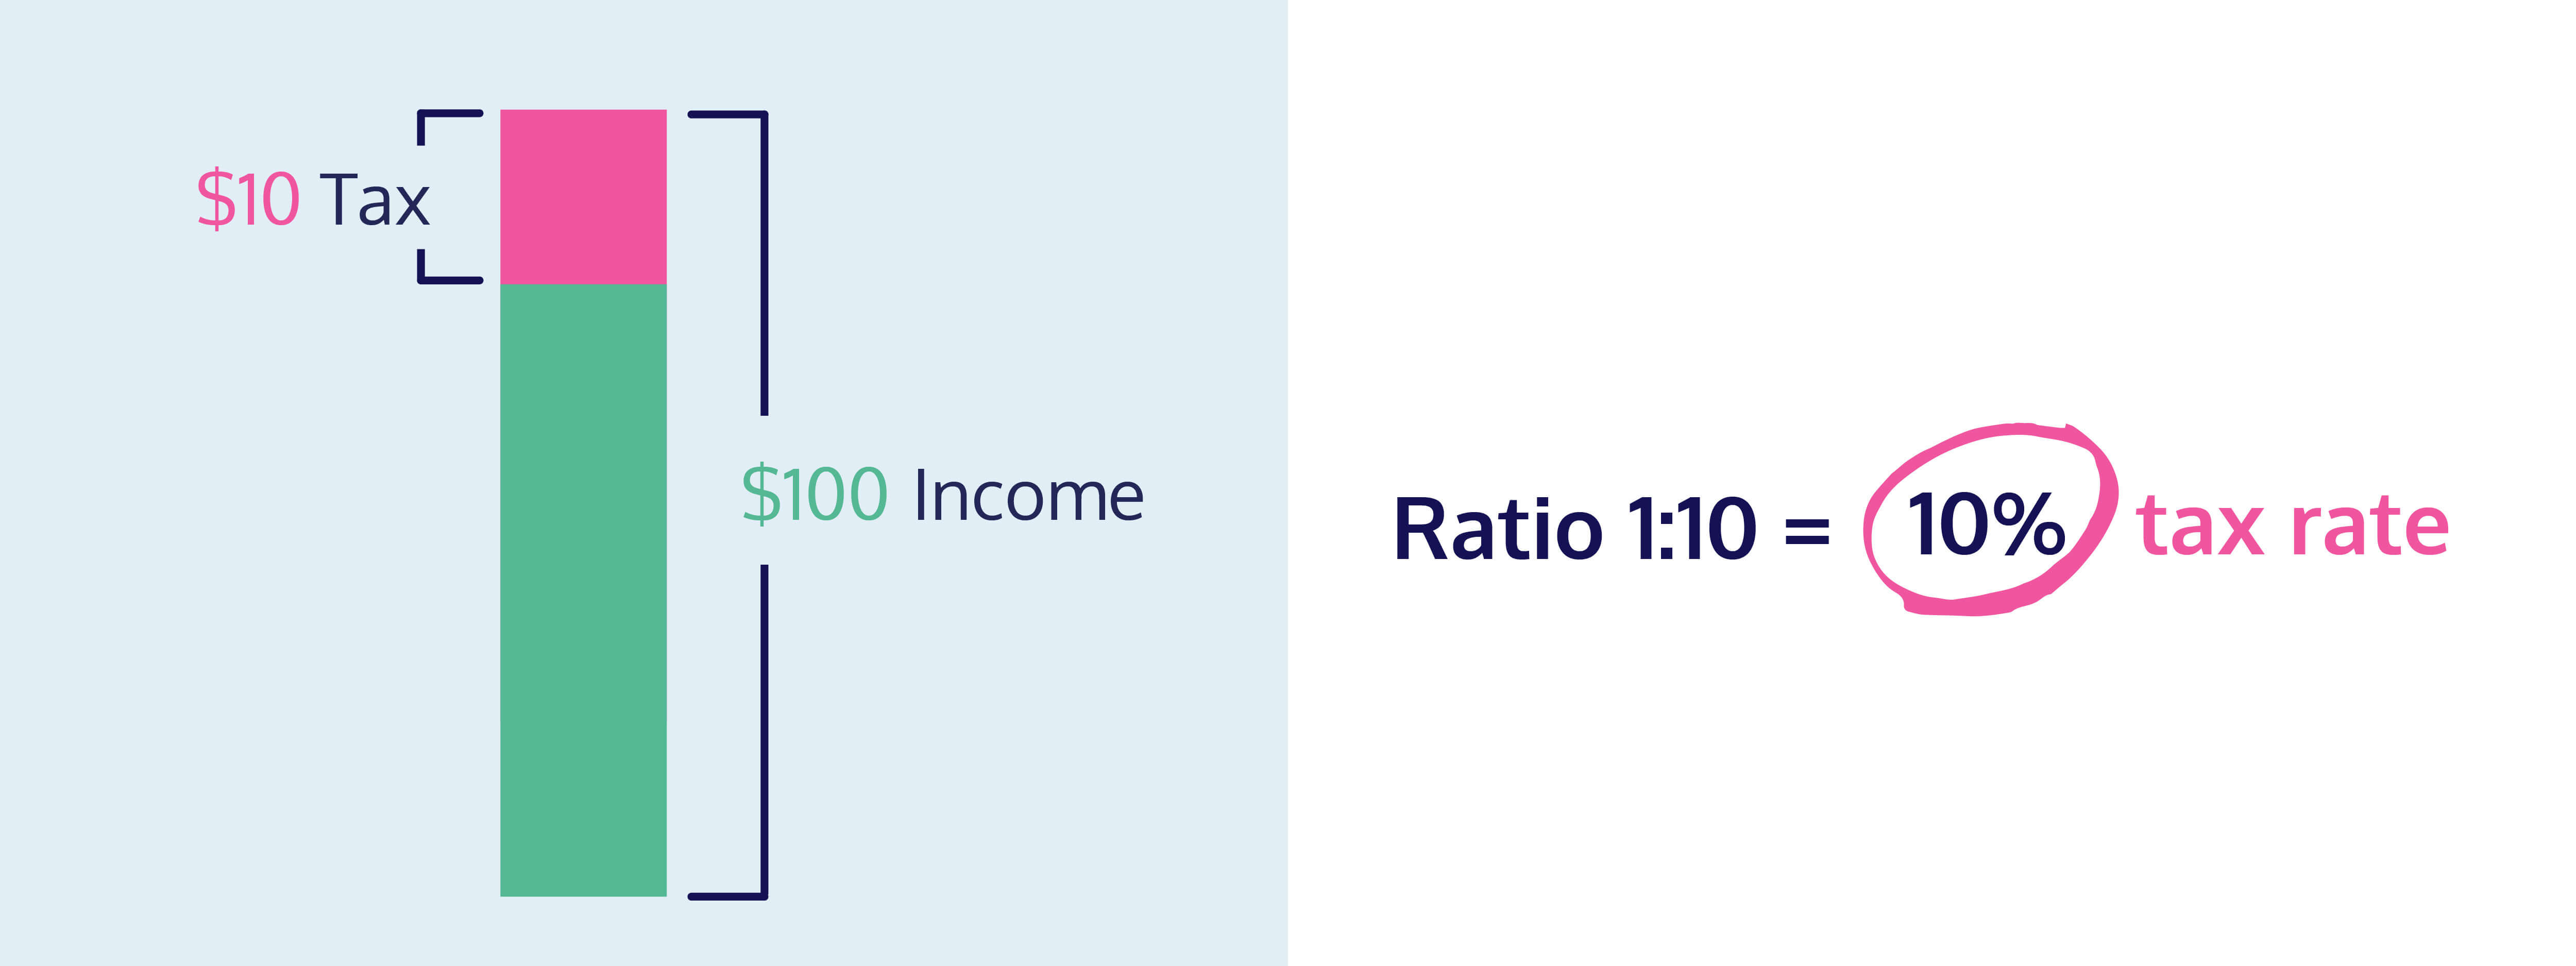 Tax rate ratio